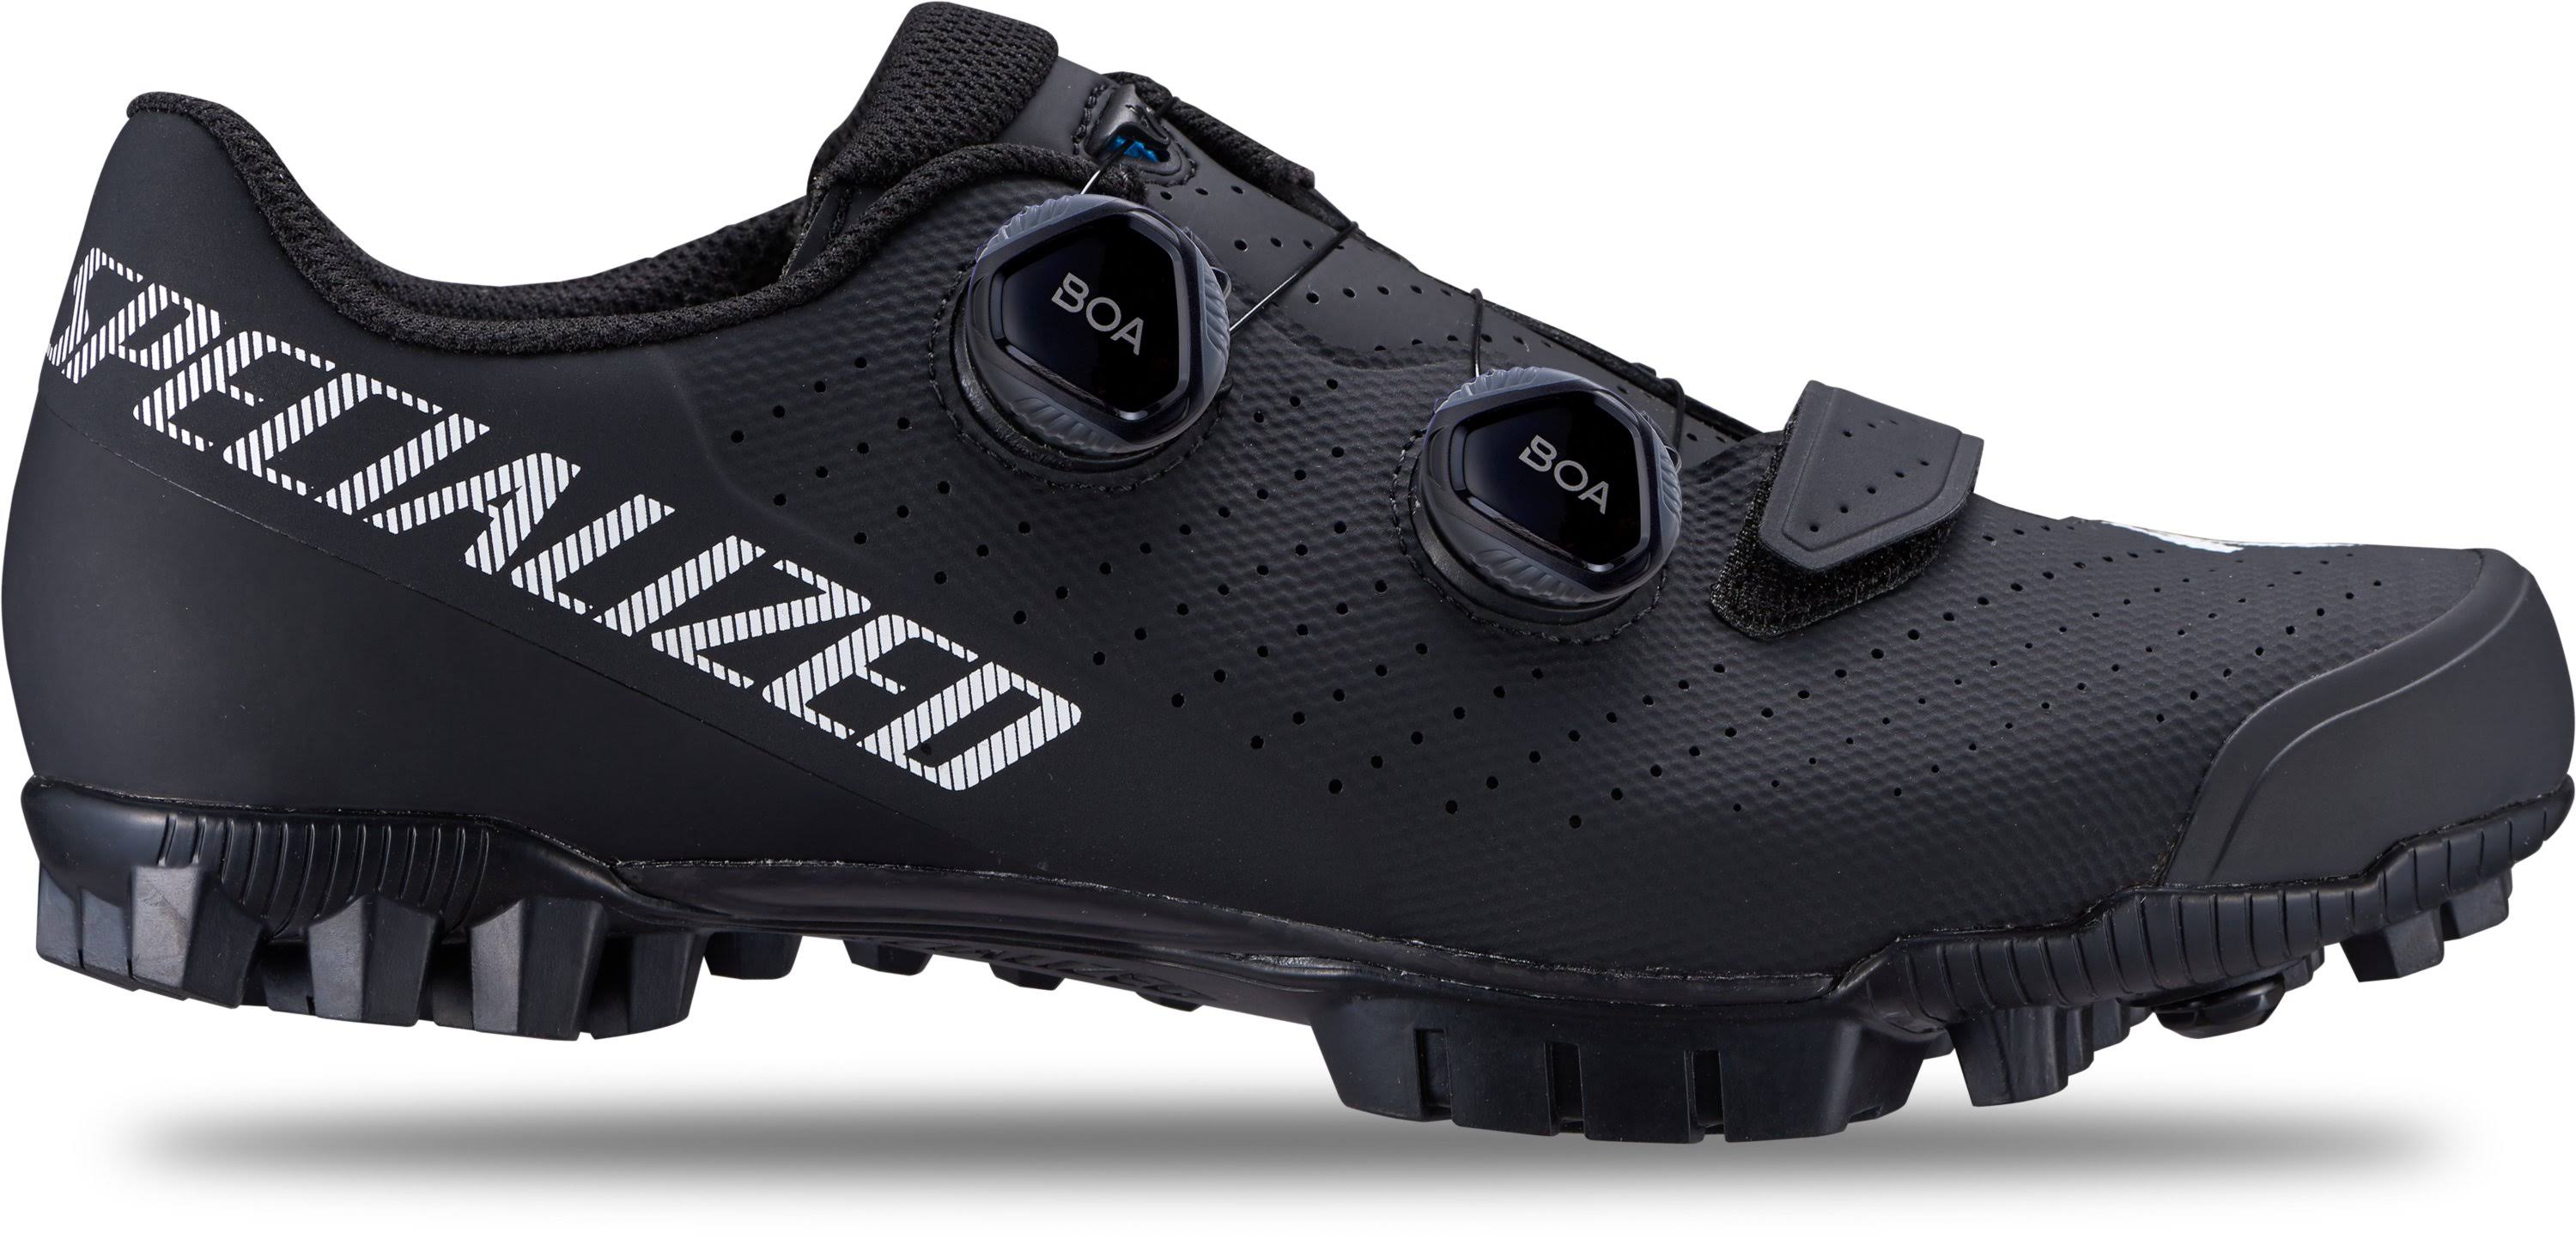 Specialized Recon 3.0 Mountain Bike Shoes (Size: 43)